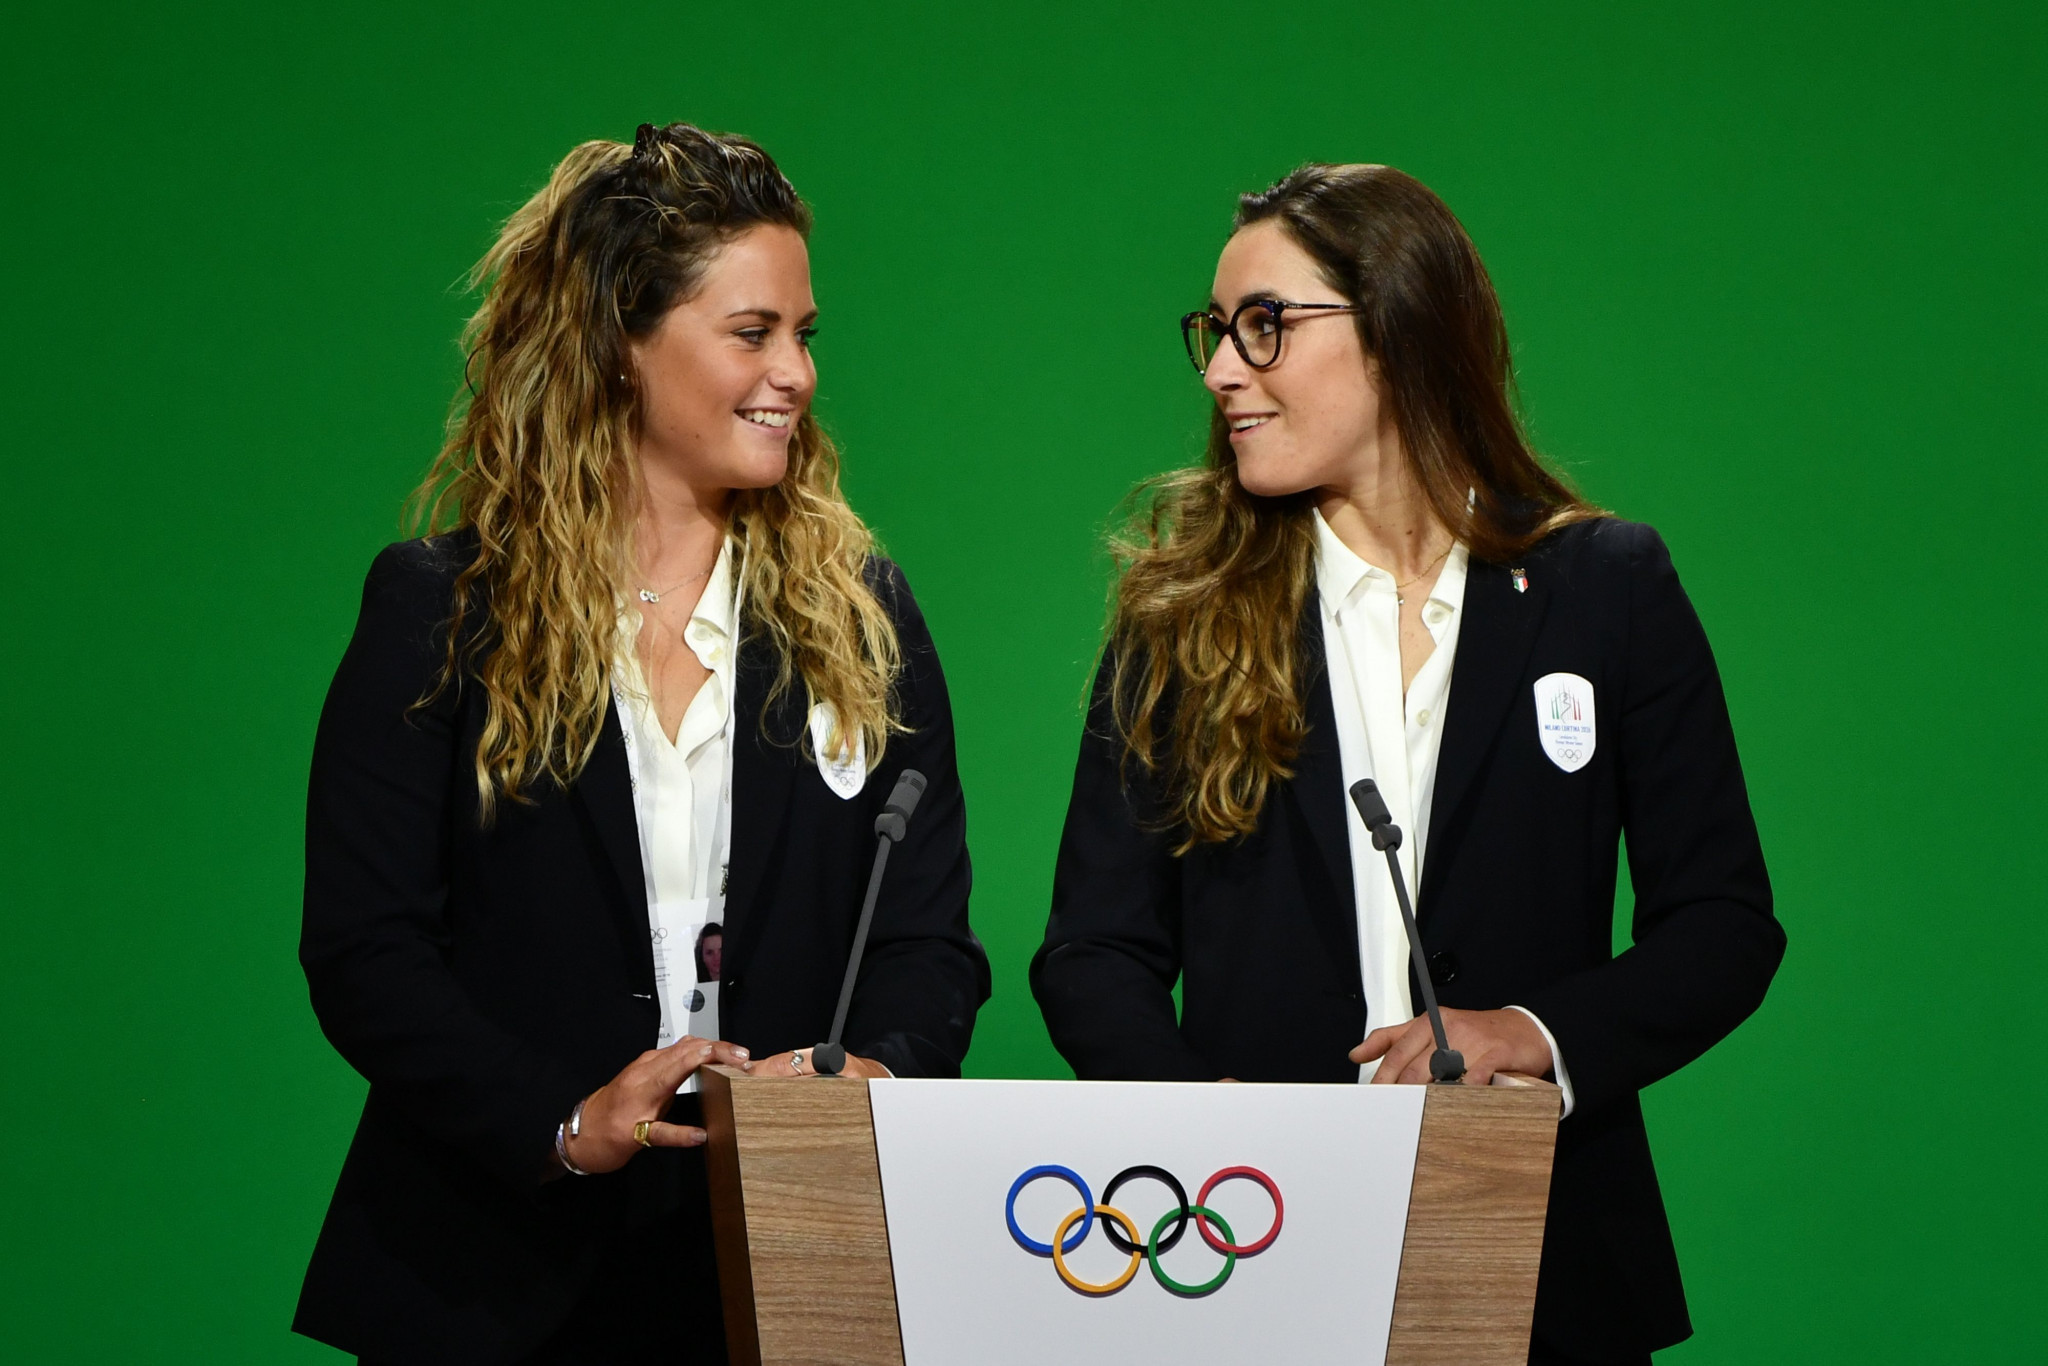 Moioli replaces injured Goggia as Italy flagbearer for Beijing 2022 Opening Ceremony